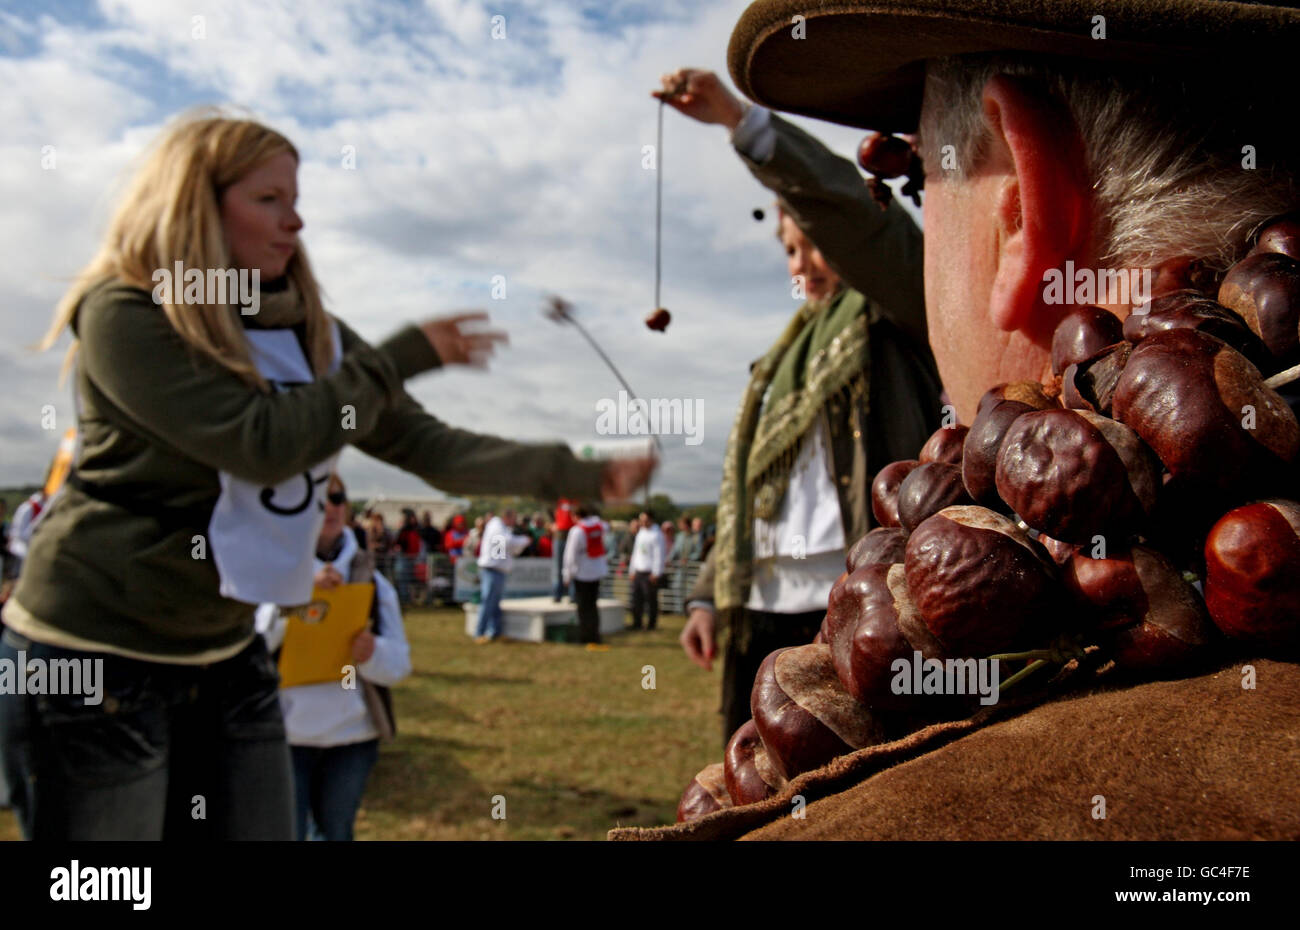 Customs and Traditions - World Conker Championships - Ashton. A competitor takes part in the World Conker Championships, at Ashton, Northamptonshire. Stock Photo